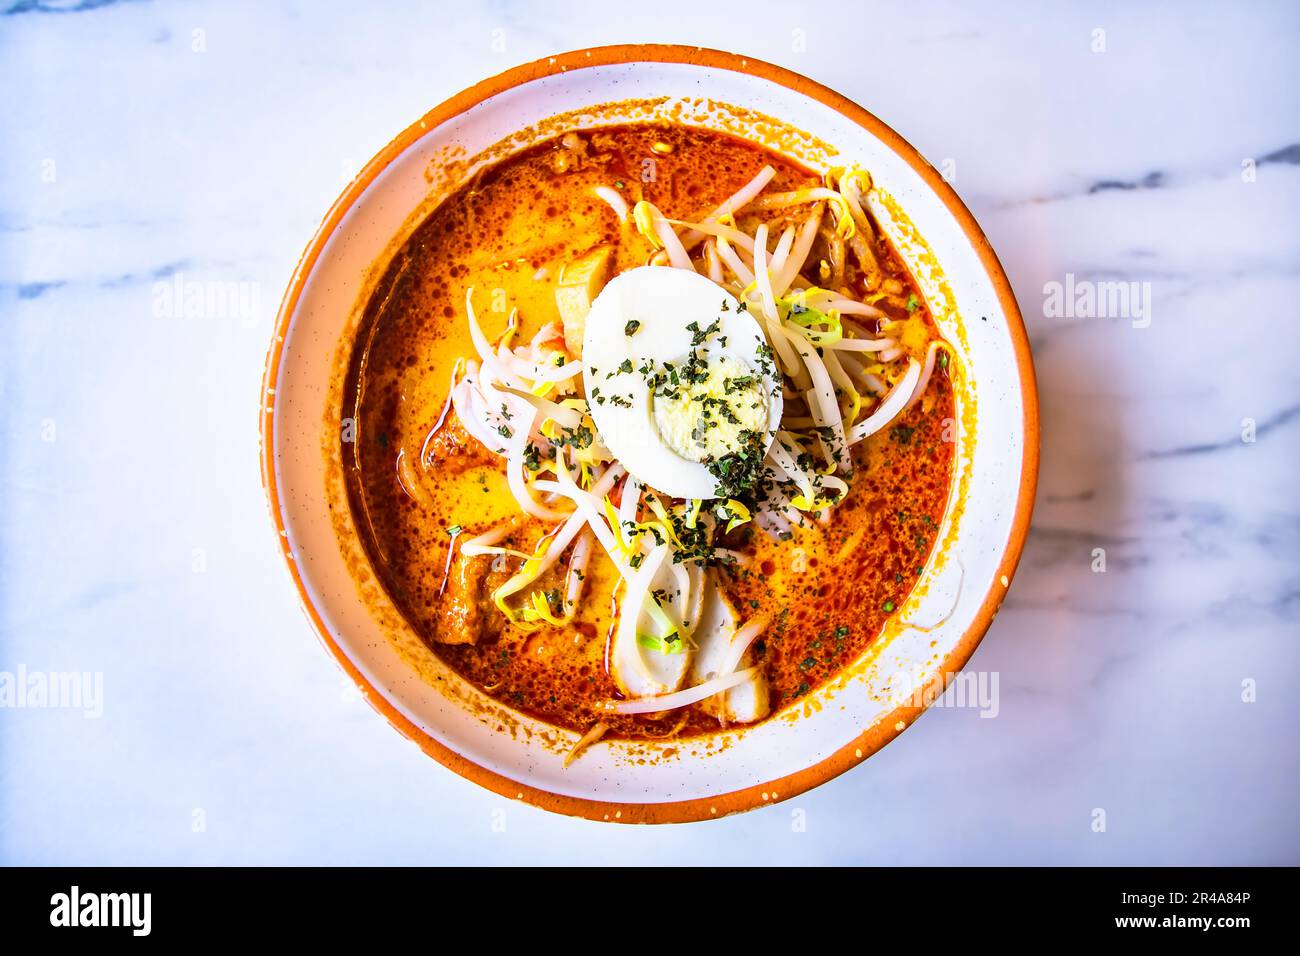 Mee siam is a dish of thin rice vermicelli of hot, sweet and sour flavours, originated in Penang but popular among the Malay and Peranakan communities Stock Photo